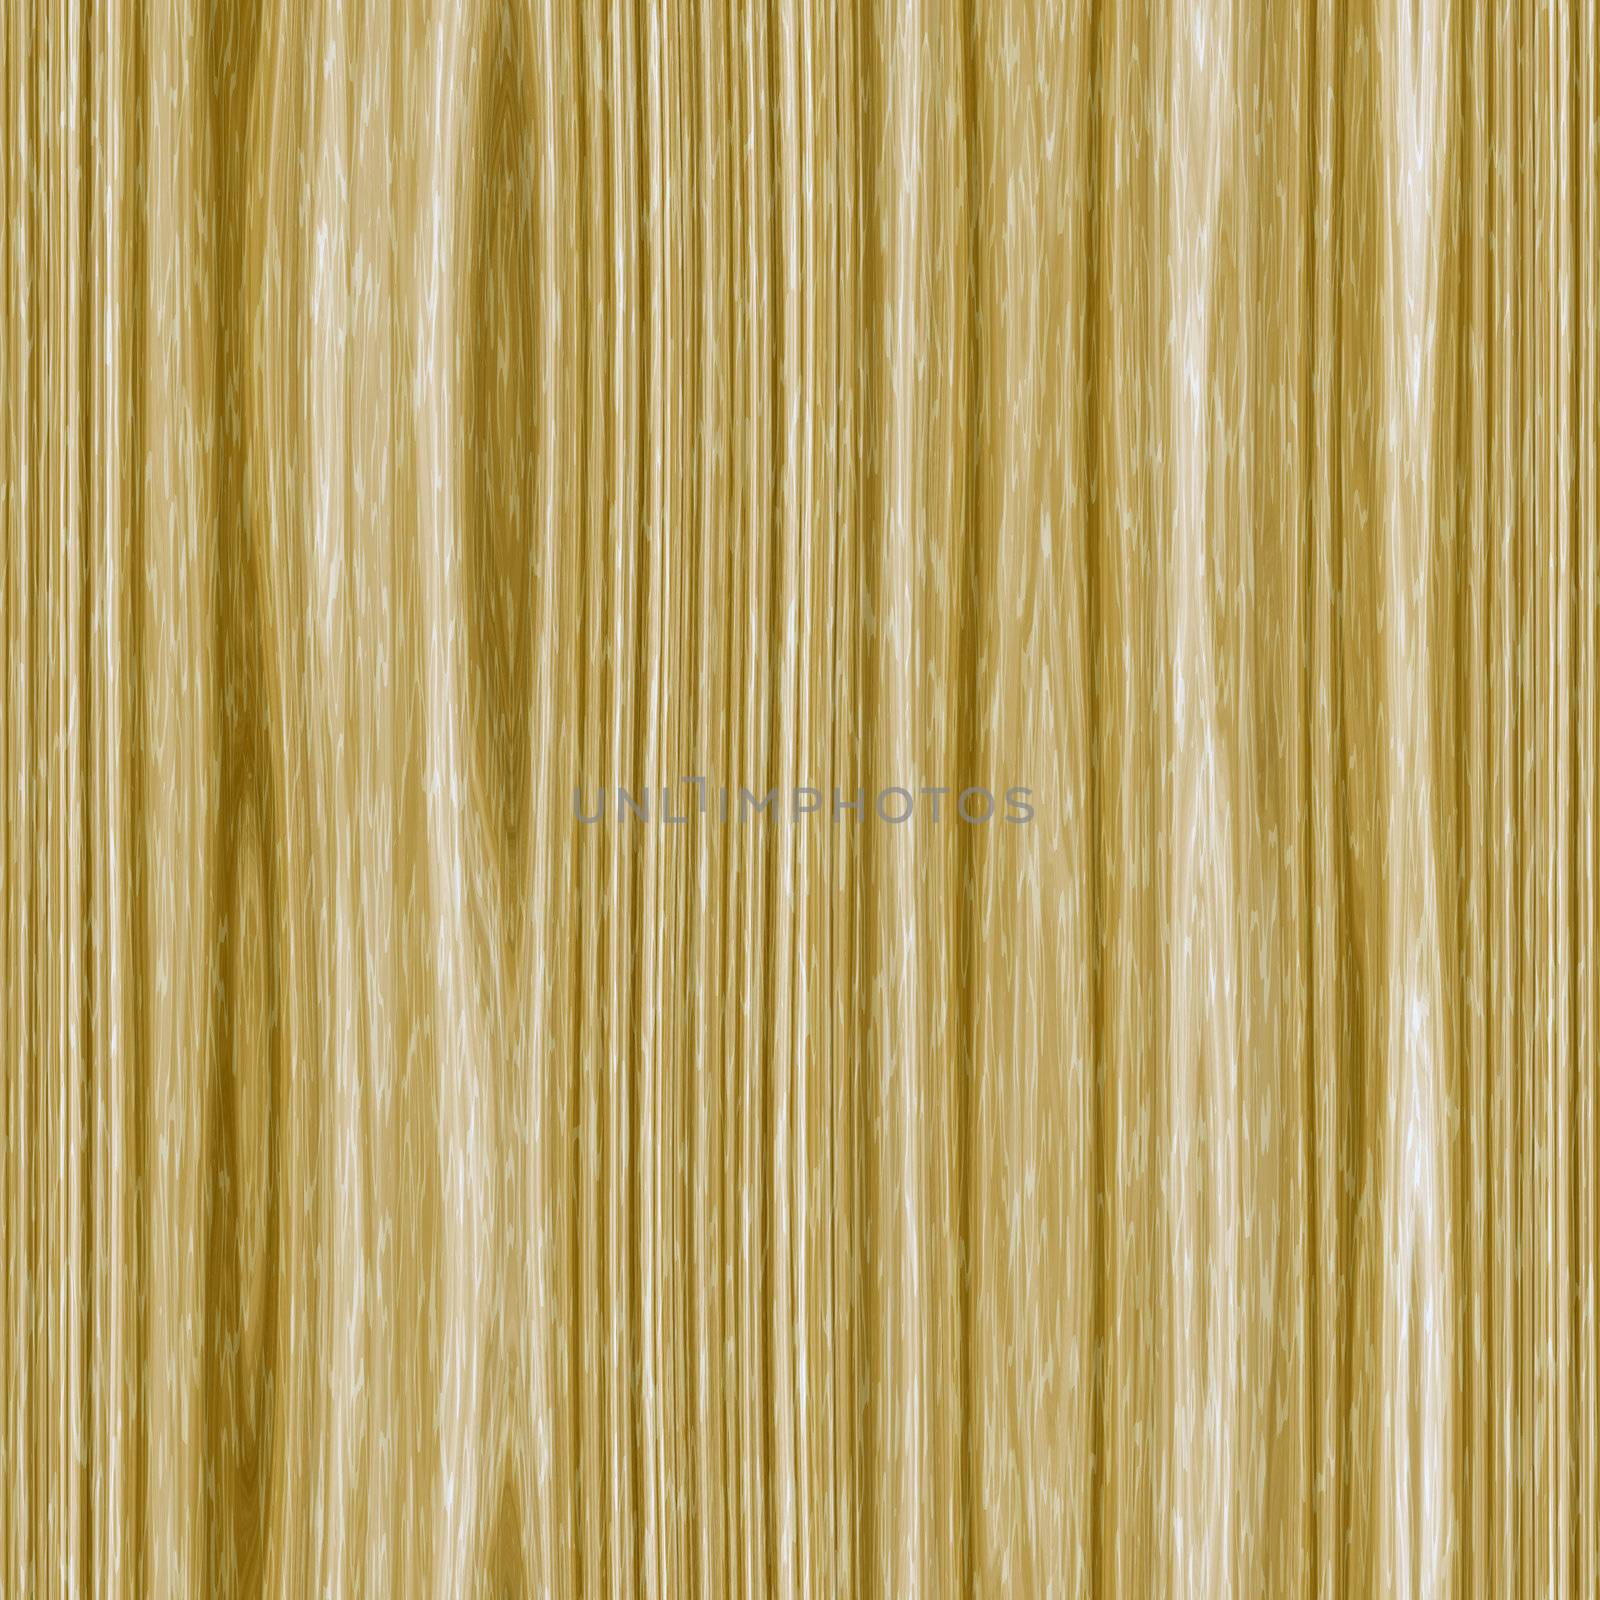 Pine Woodgrain Pattern by graficallyminded